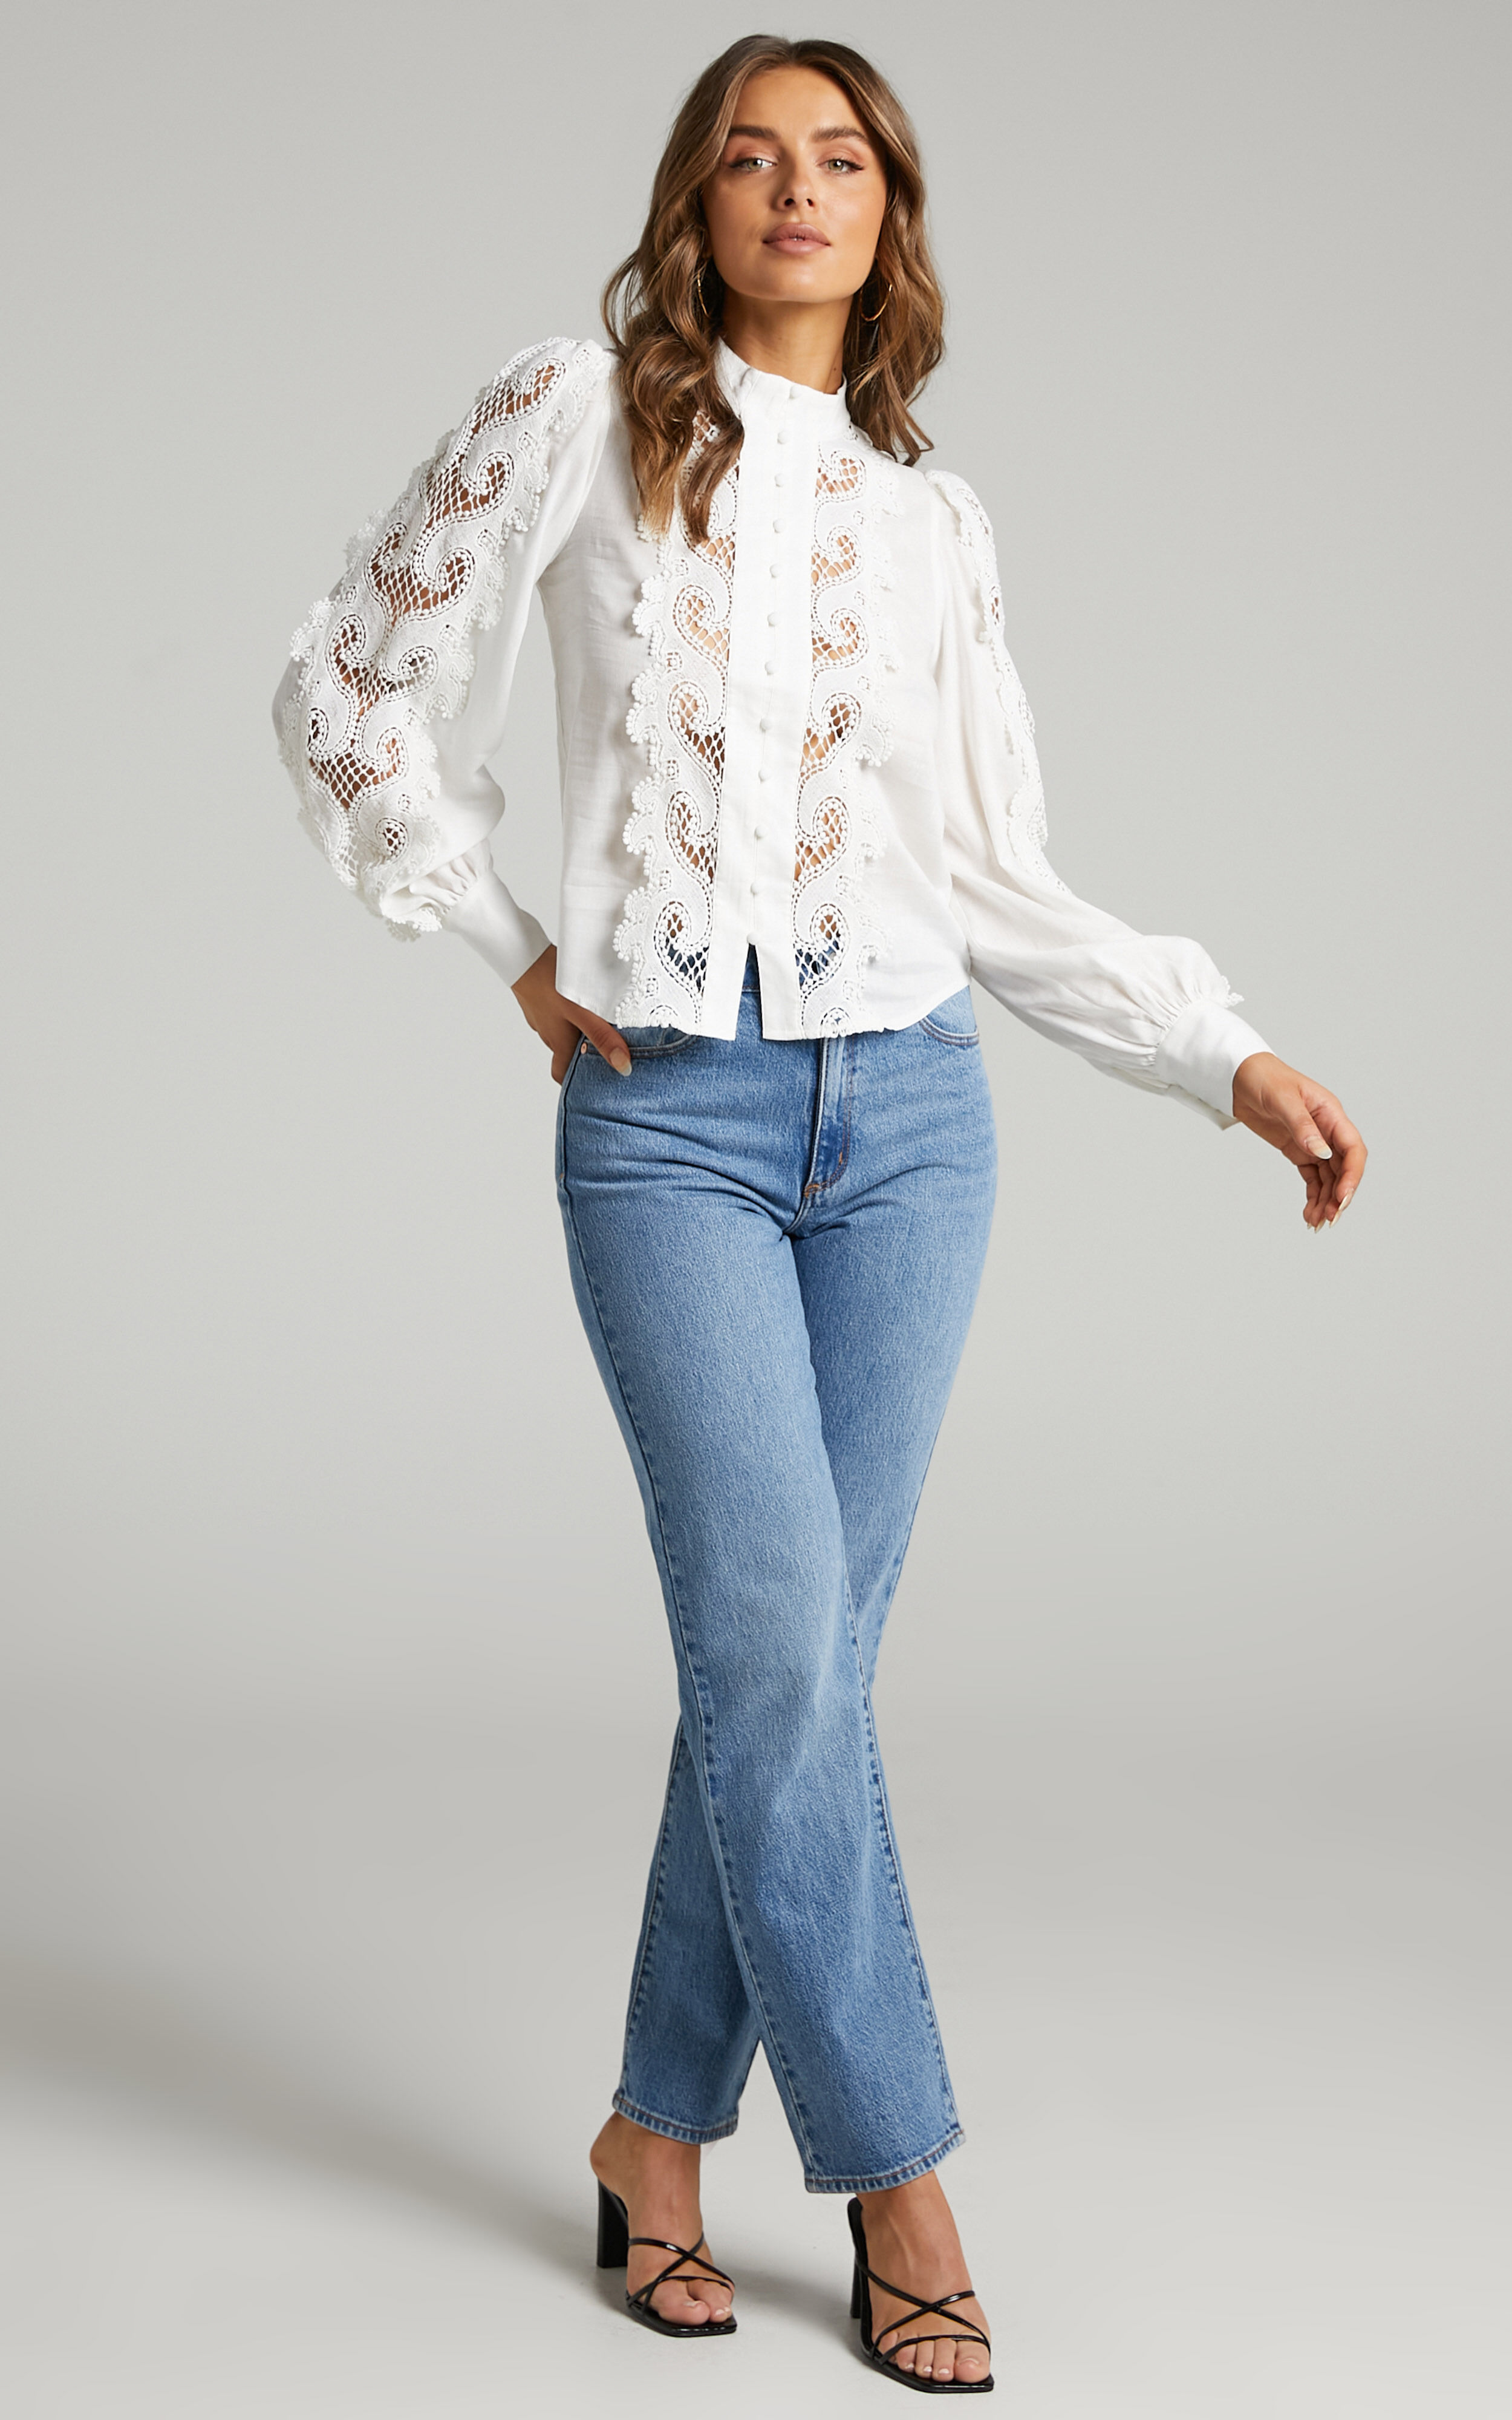 Belissa Lace Trim High Neck Blouse in White - 06, WHT1, super-hi-res image number null